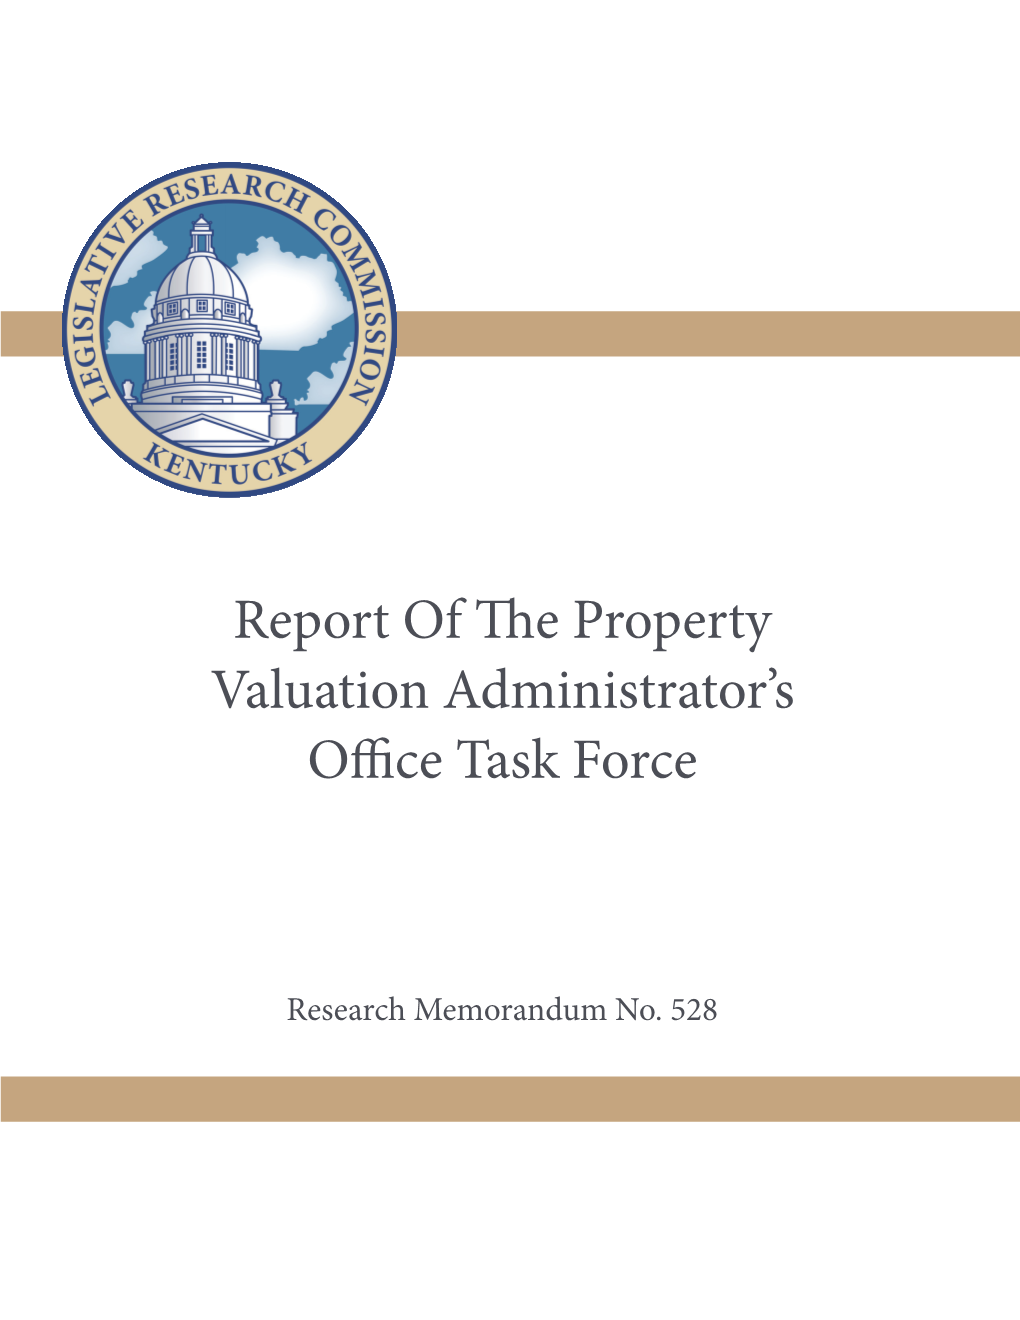 Report of the Property Valuation Administrator's Office Task Force